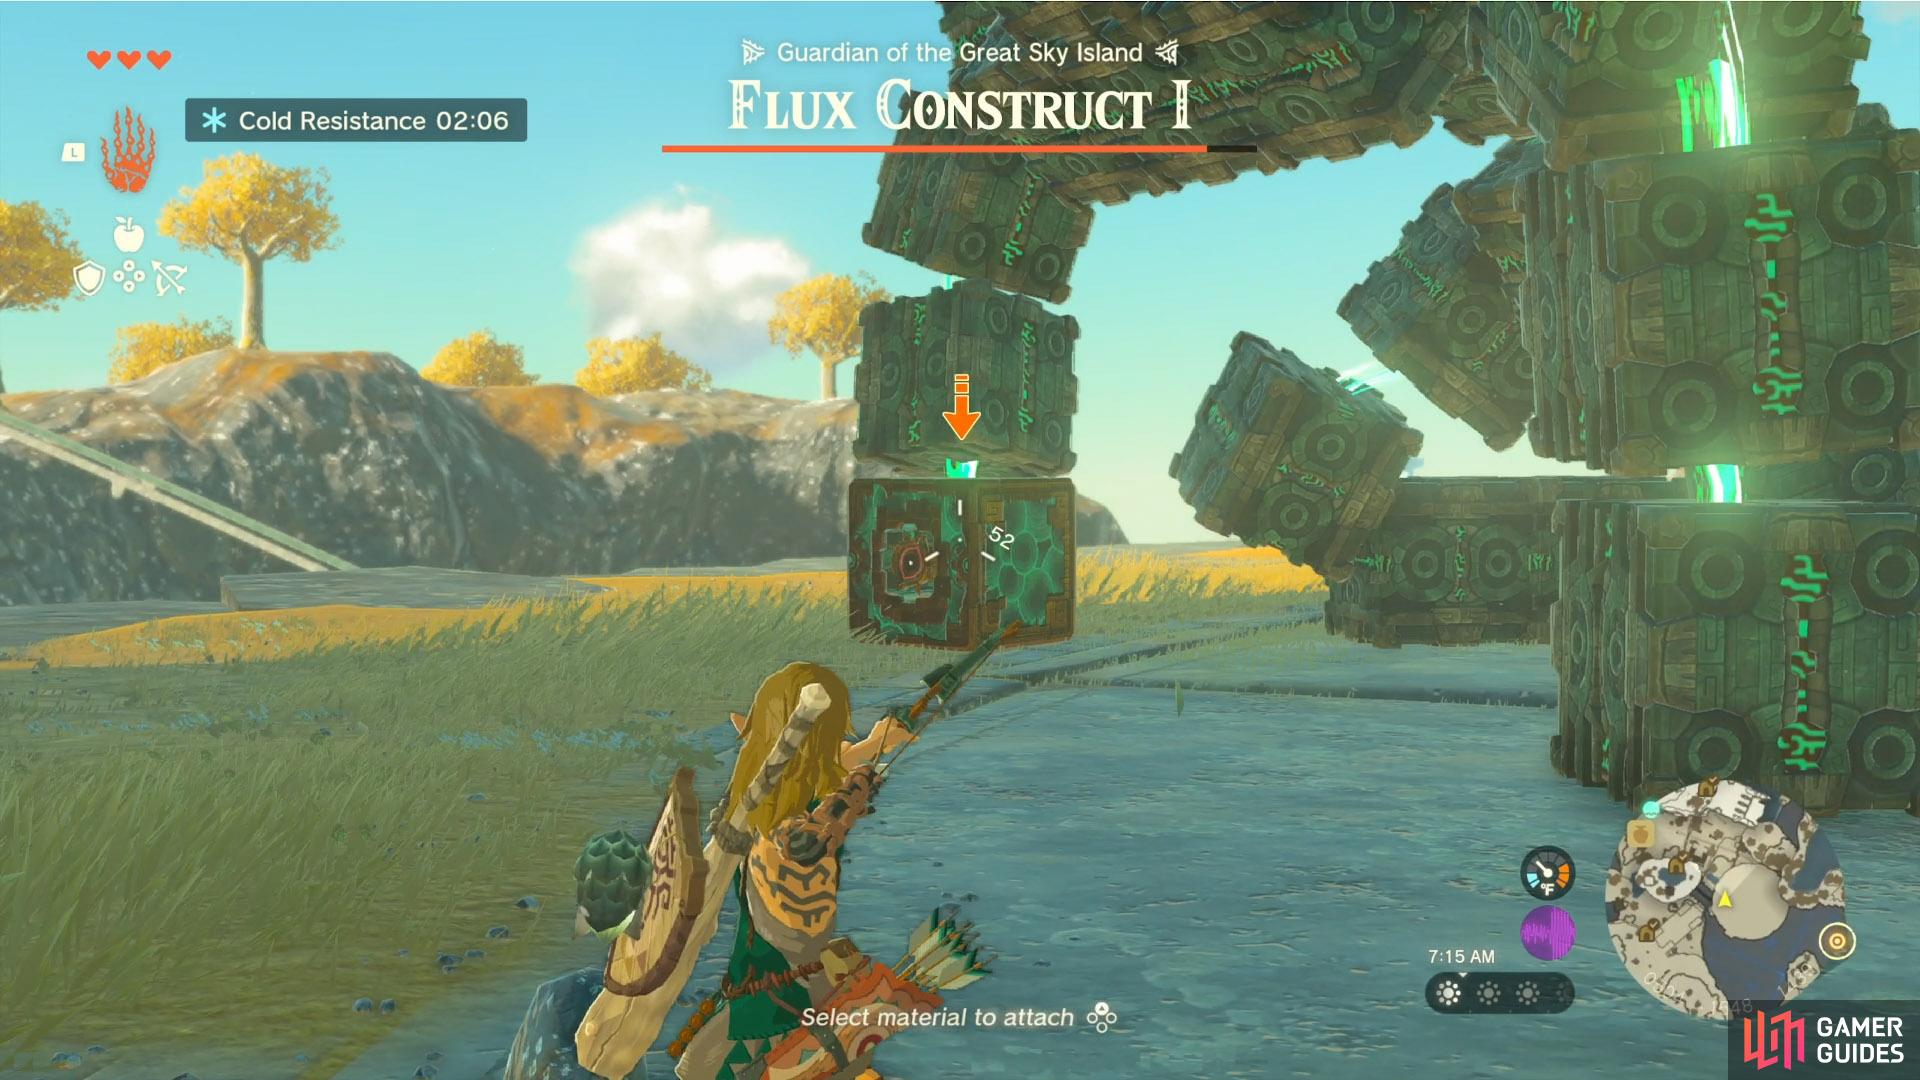 The Flux !Construct 1 weak spot that you need to target